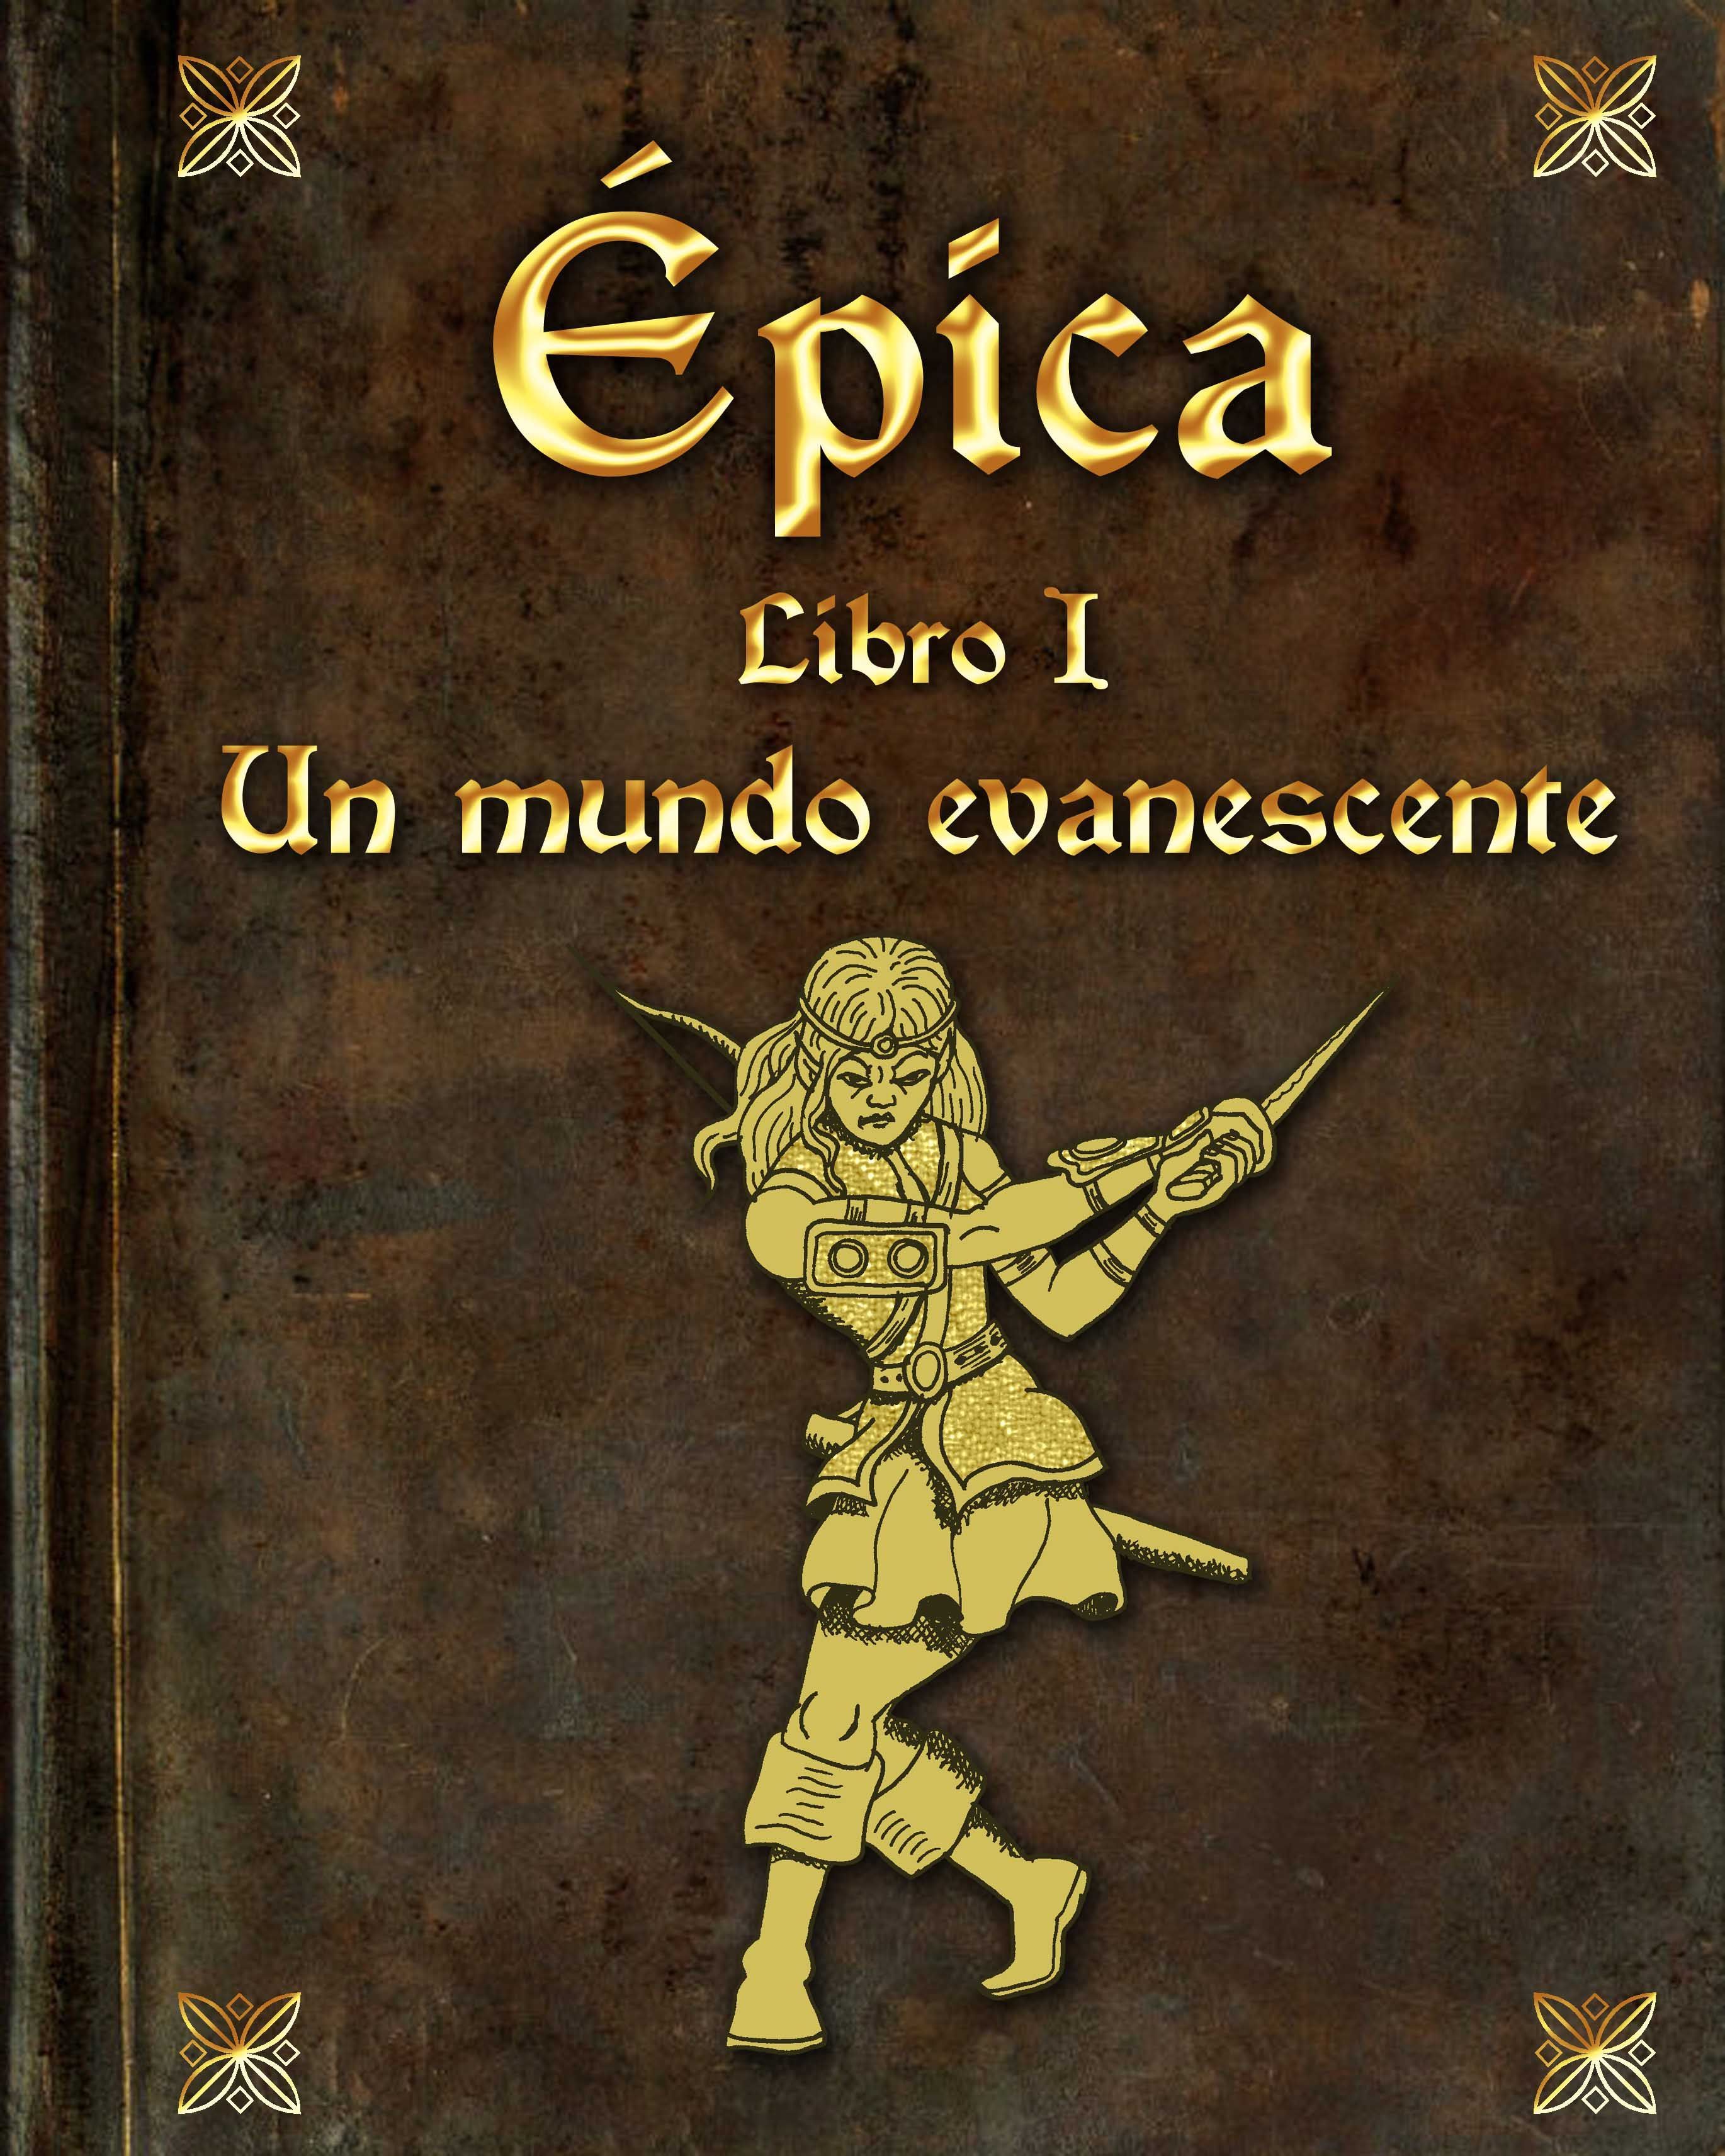 Epica: An evanescent world